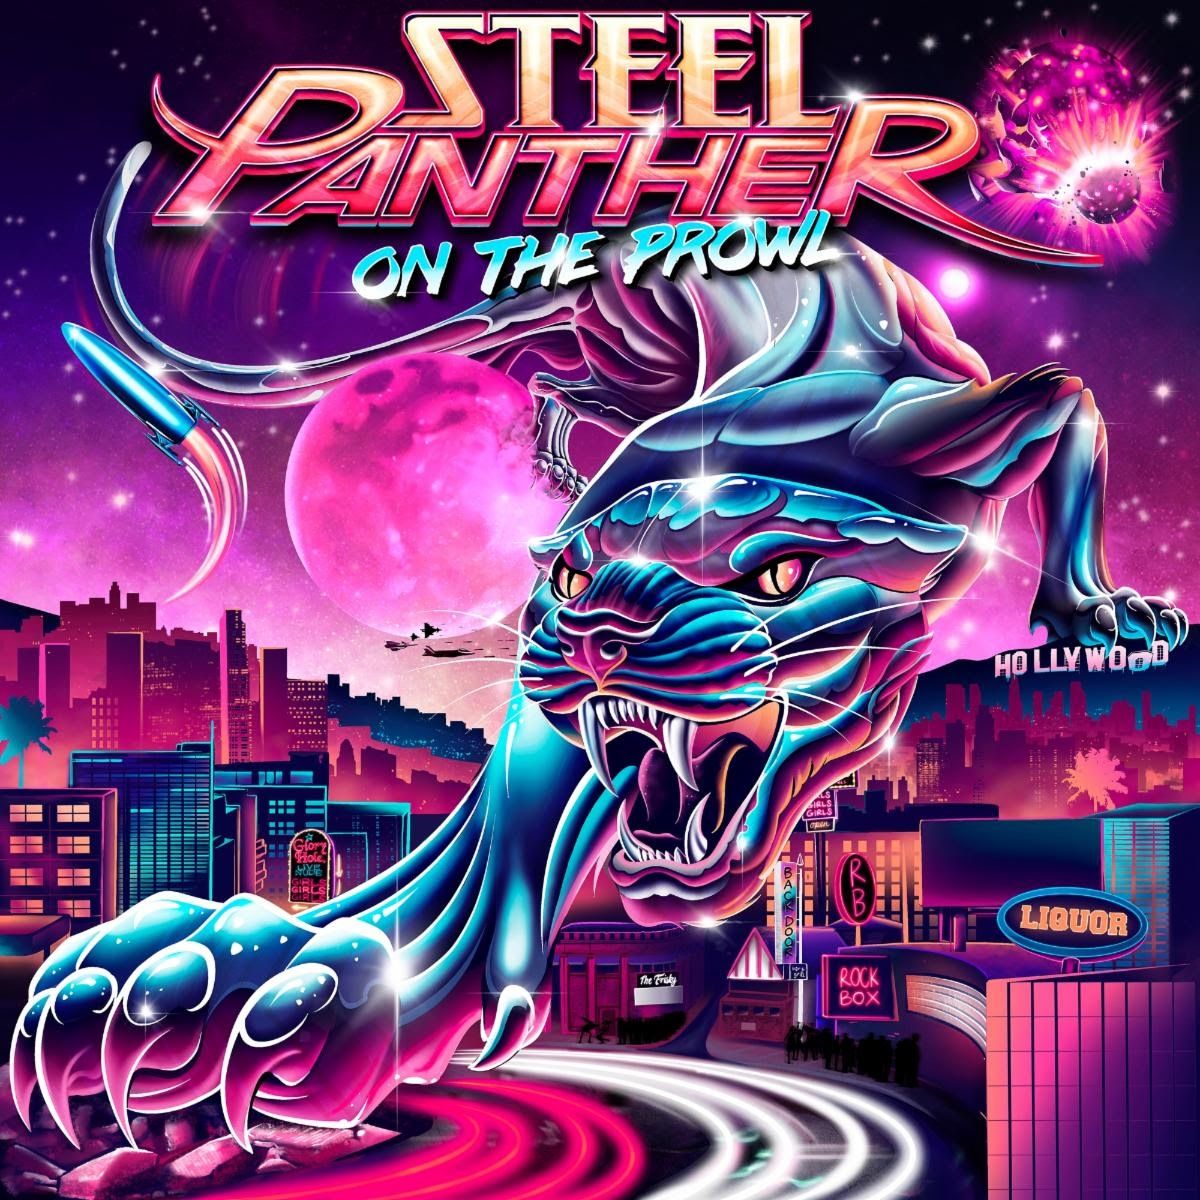 Watch The Brand New Video By Steel Panther For "It's Never Too Late" From Upcoming Album "On The Prowl"